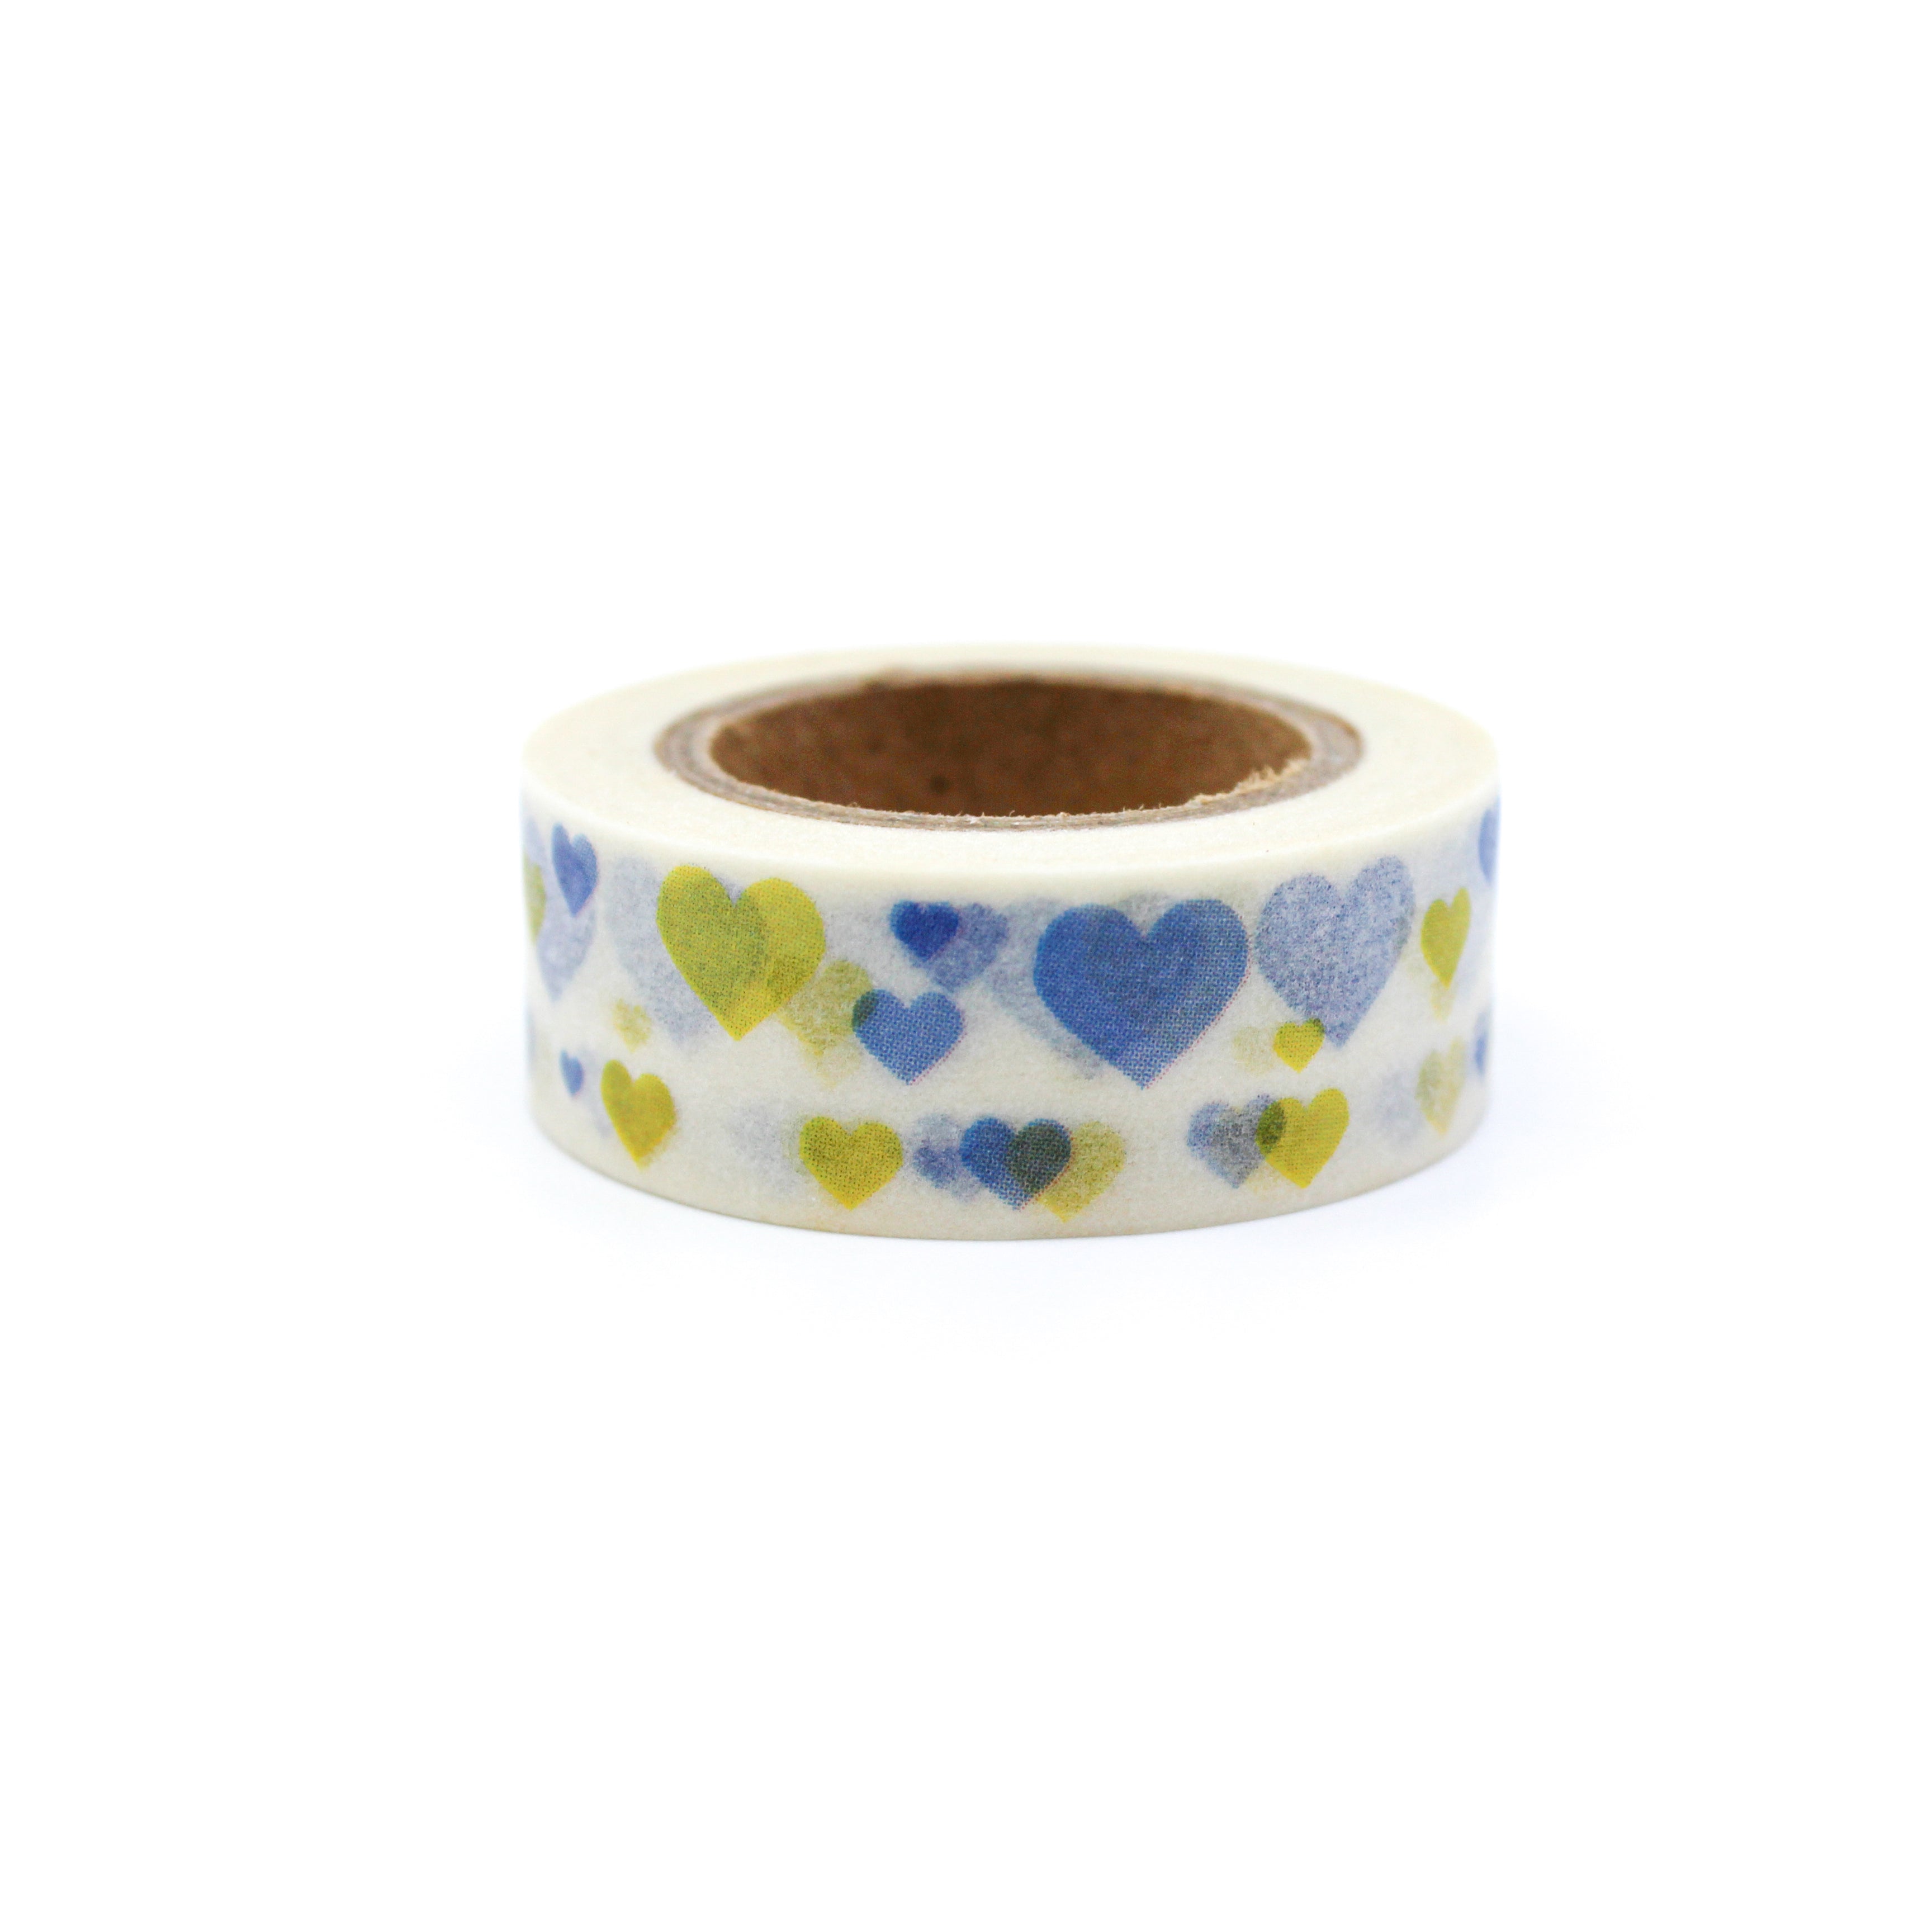 This is a blue and yellow multi hearts in a white background washi tape from BBB Supplies Craft Shop